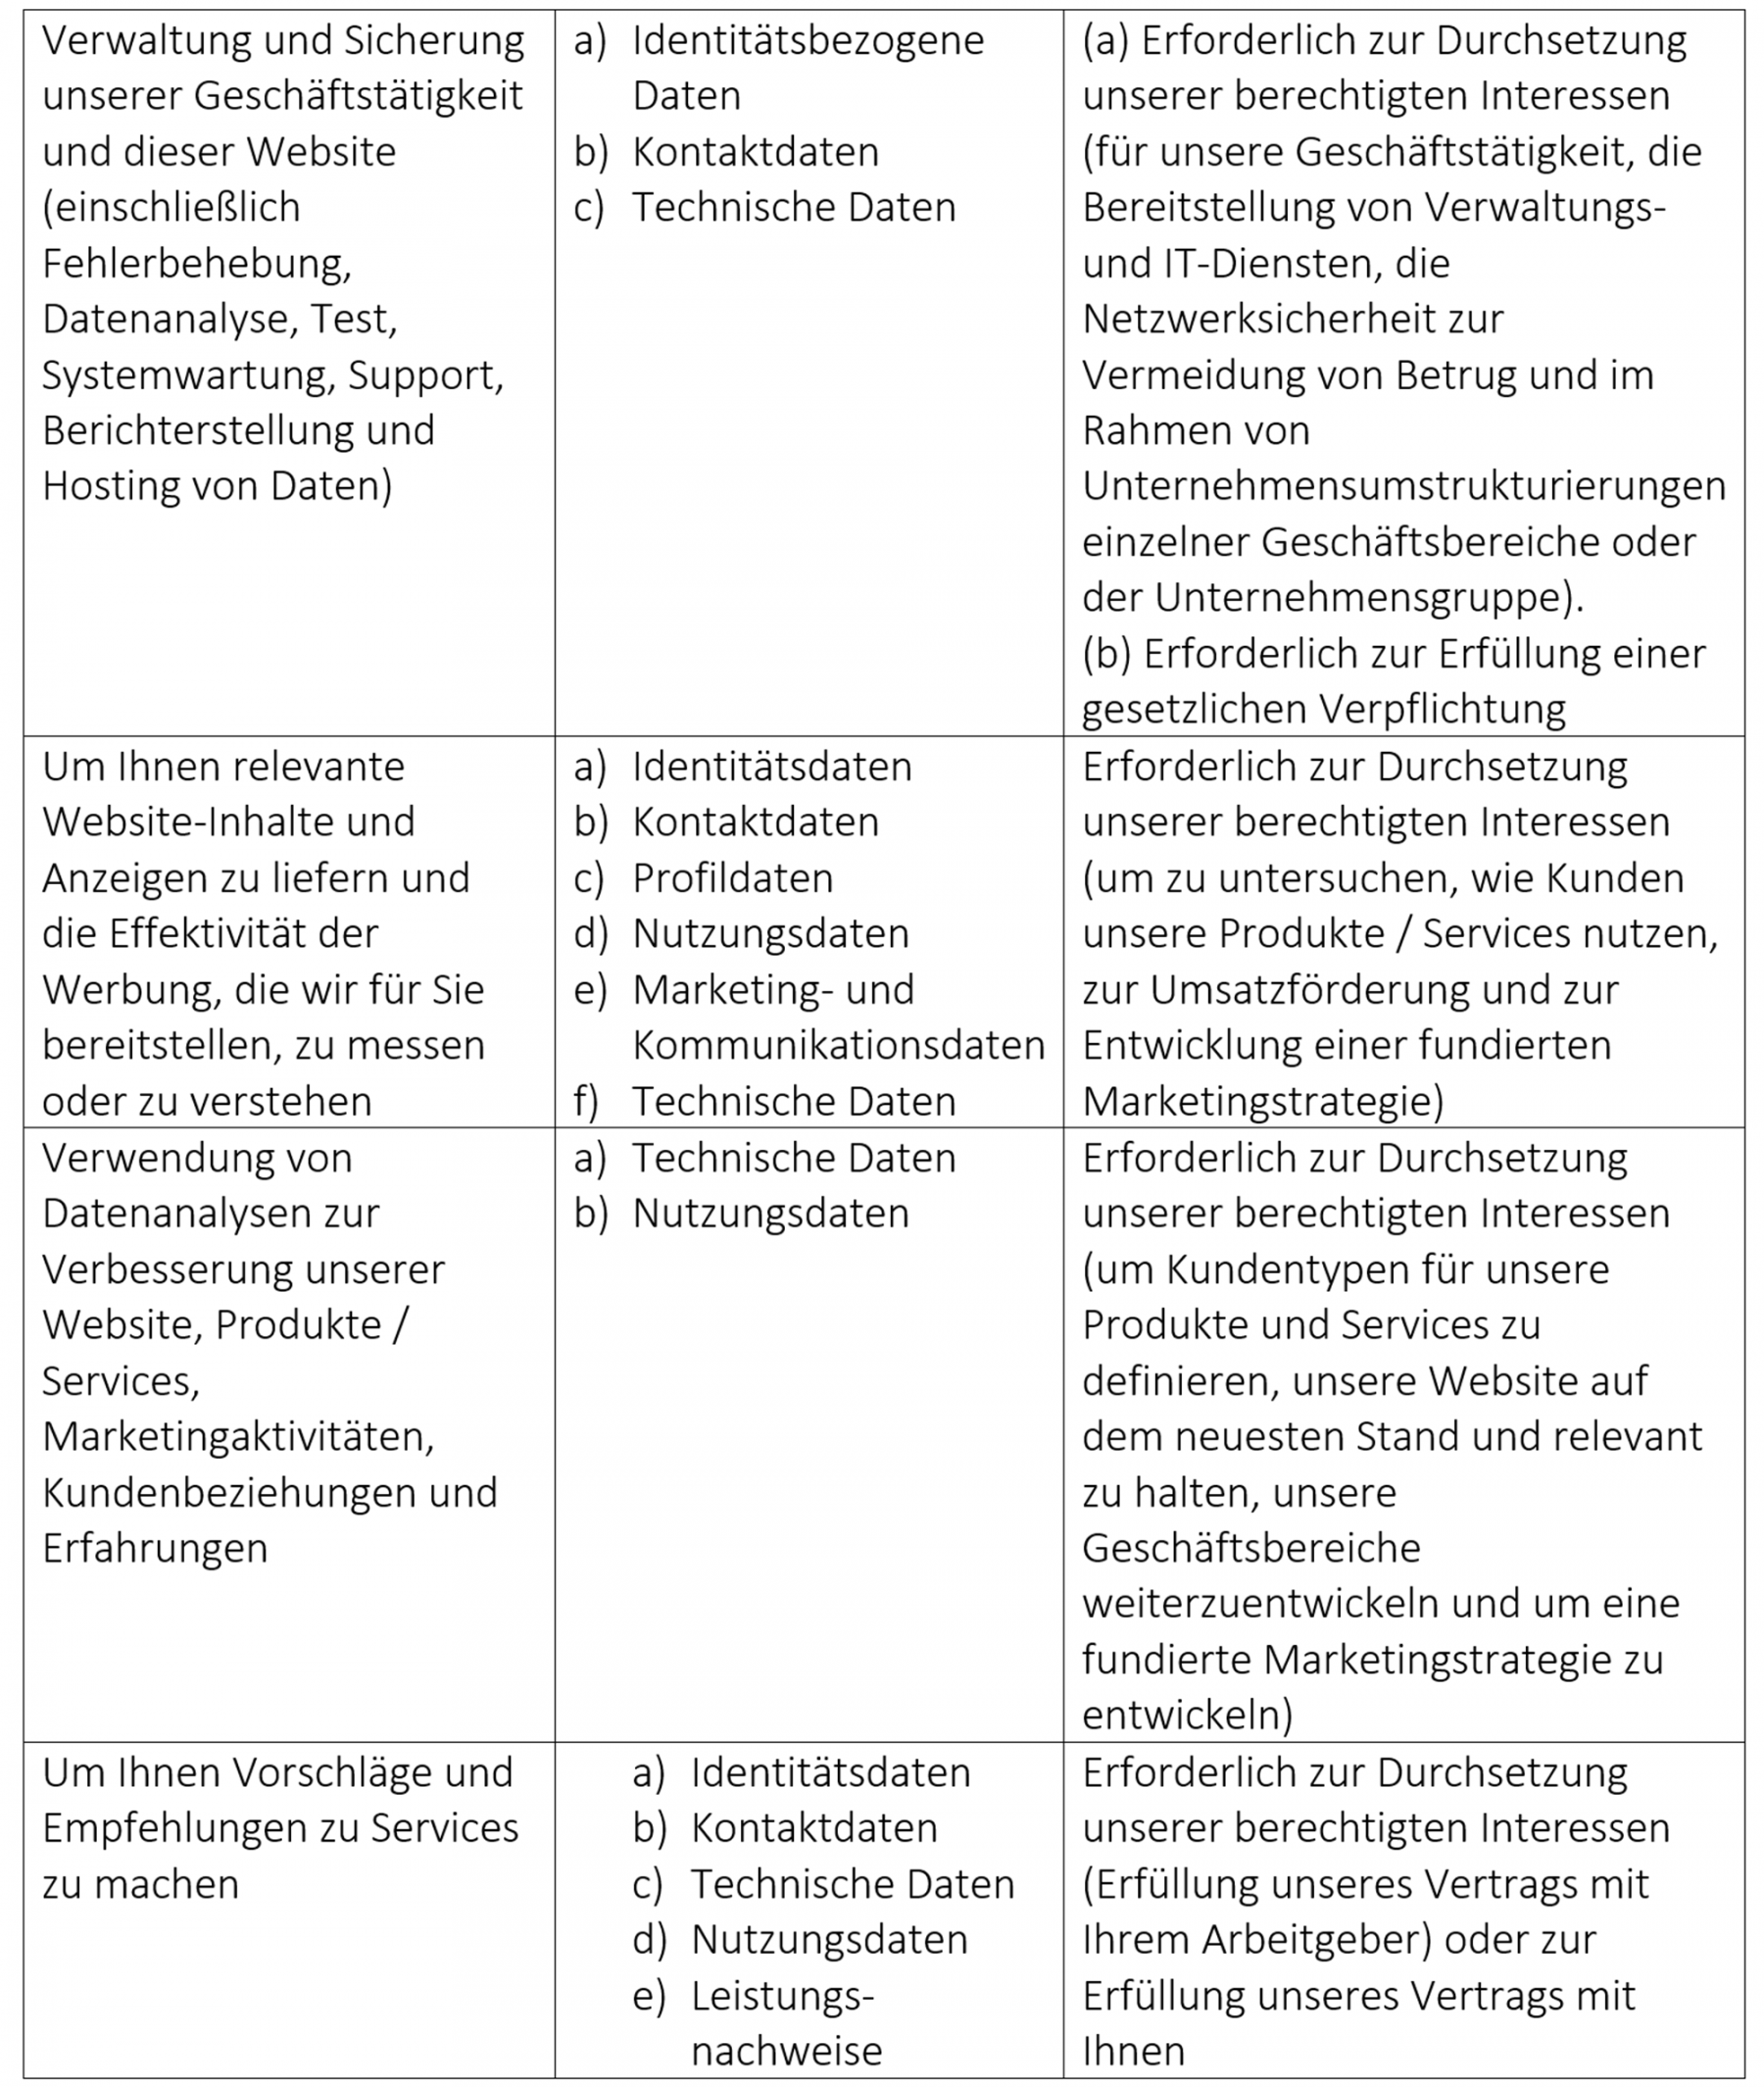 German Privacy Policy Table Image 2 docx